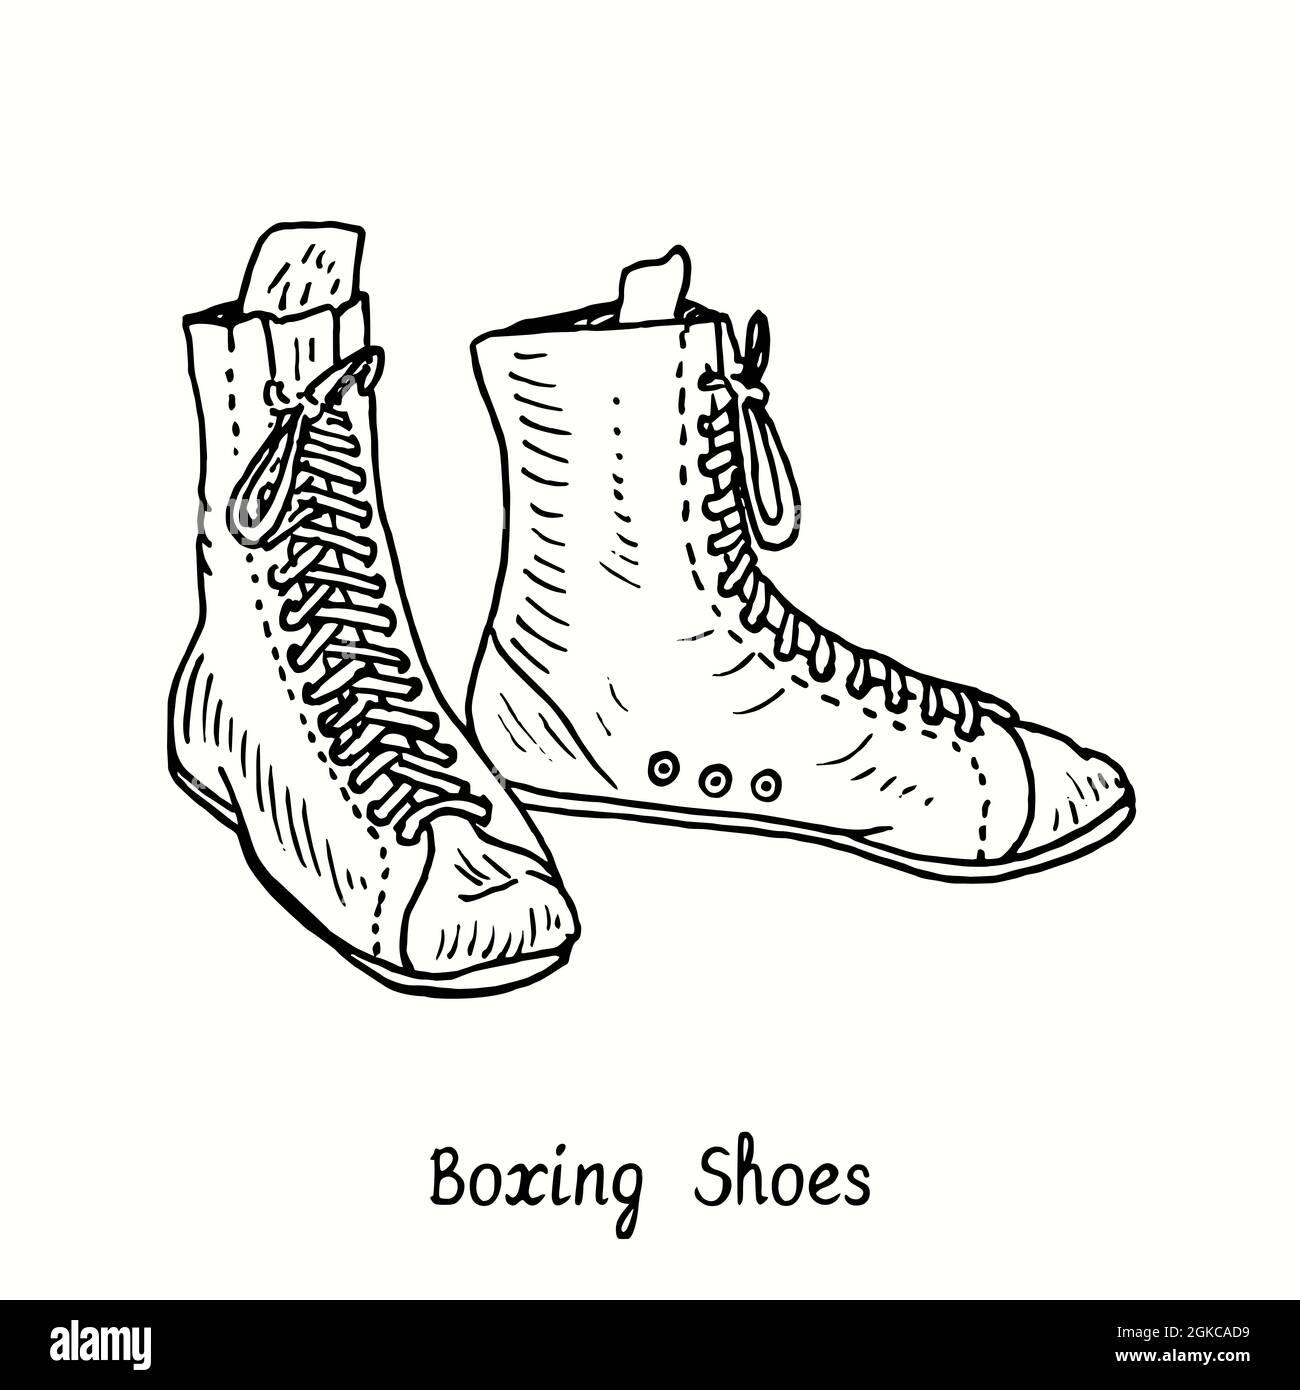 Boxing Shoes. Ink black and white doodle drawing in woodcut style. Stock Photo